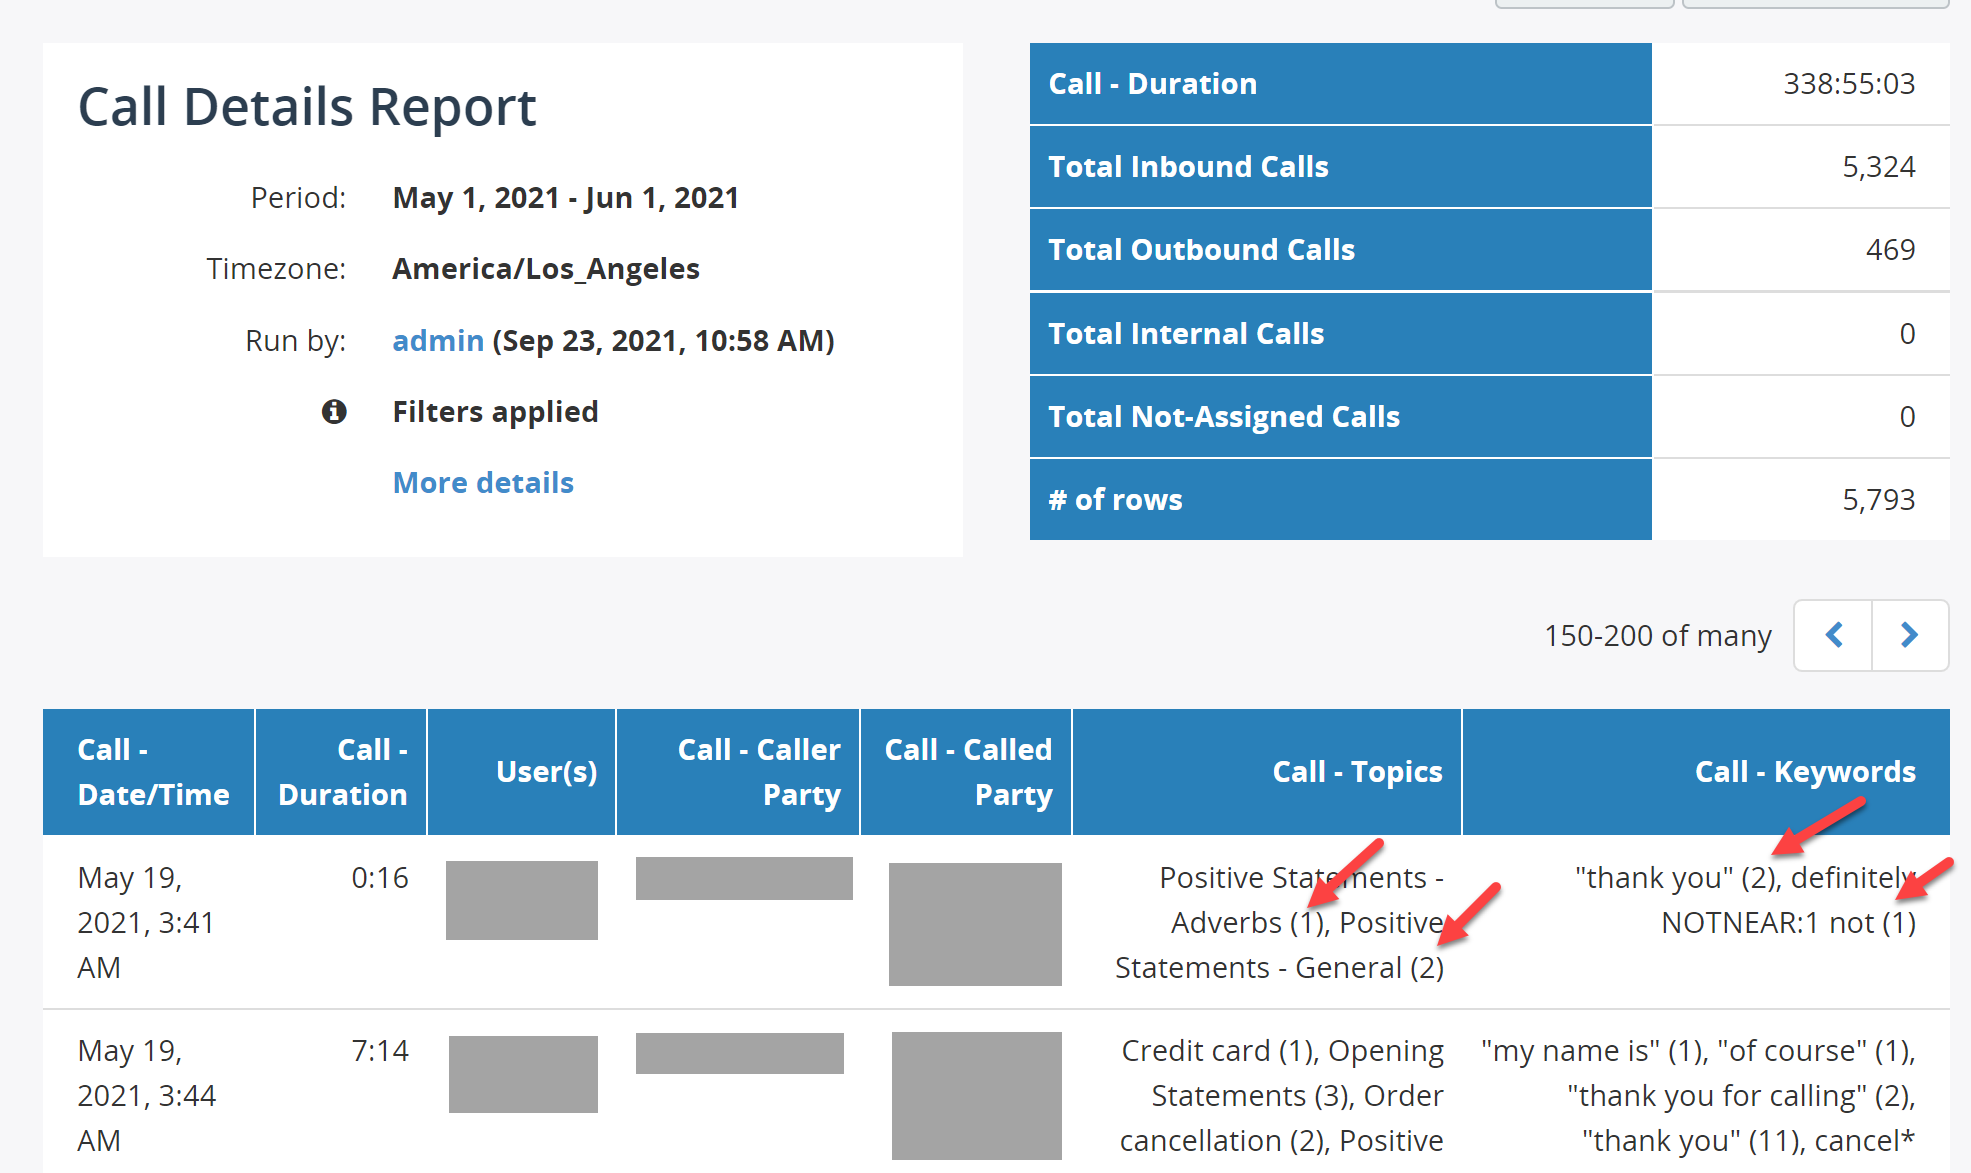 Display a number of matches of topic/keyword in Call Details Report